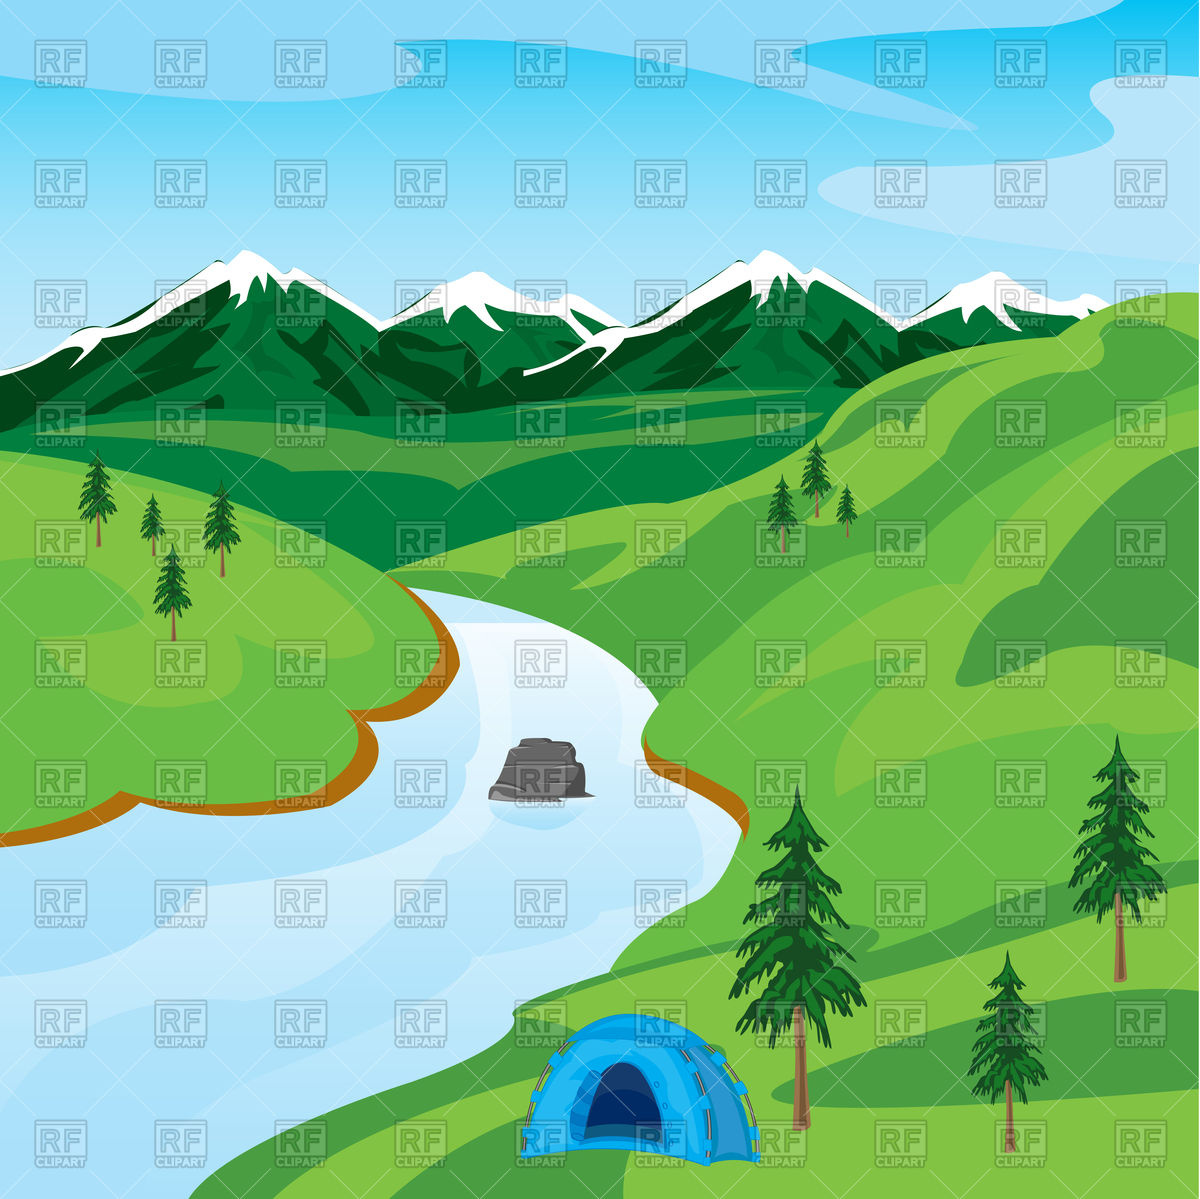 river water clipart - photo #32